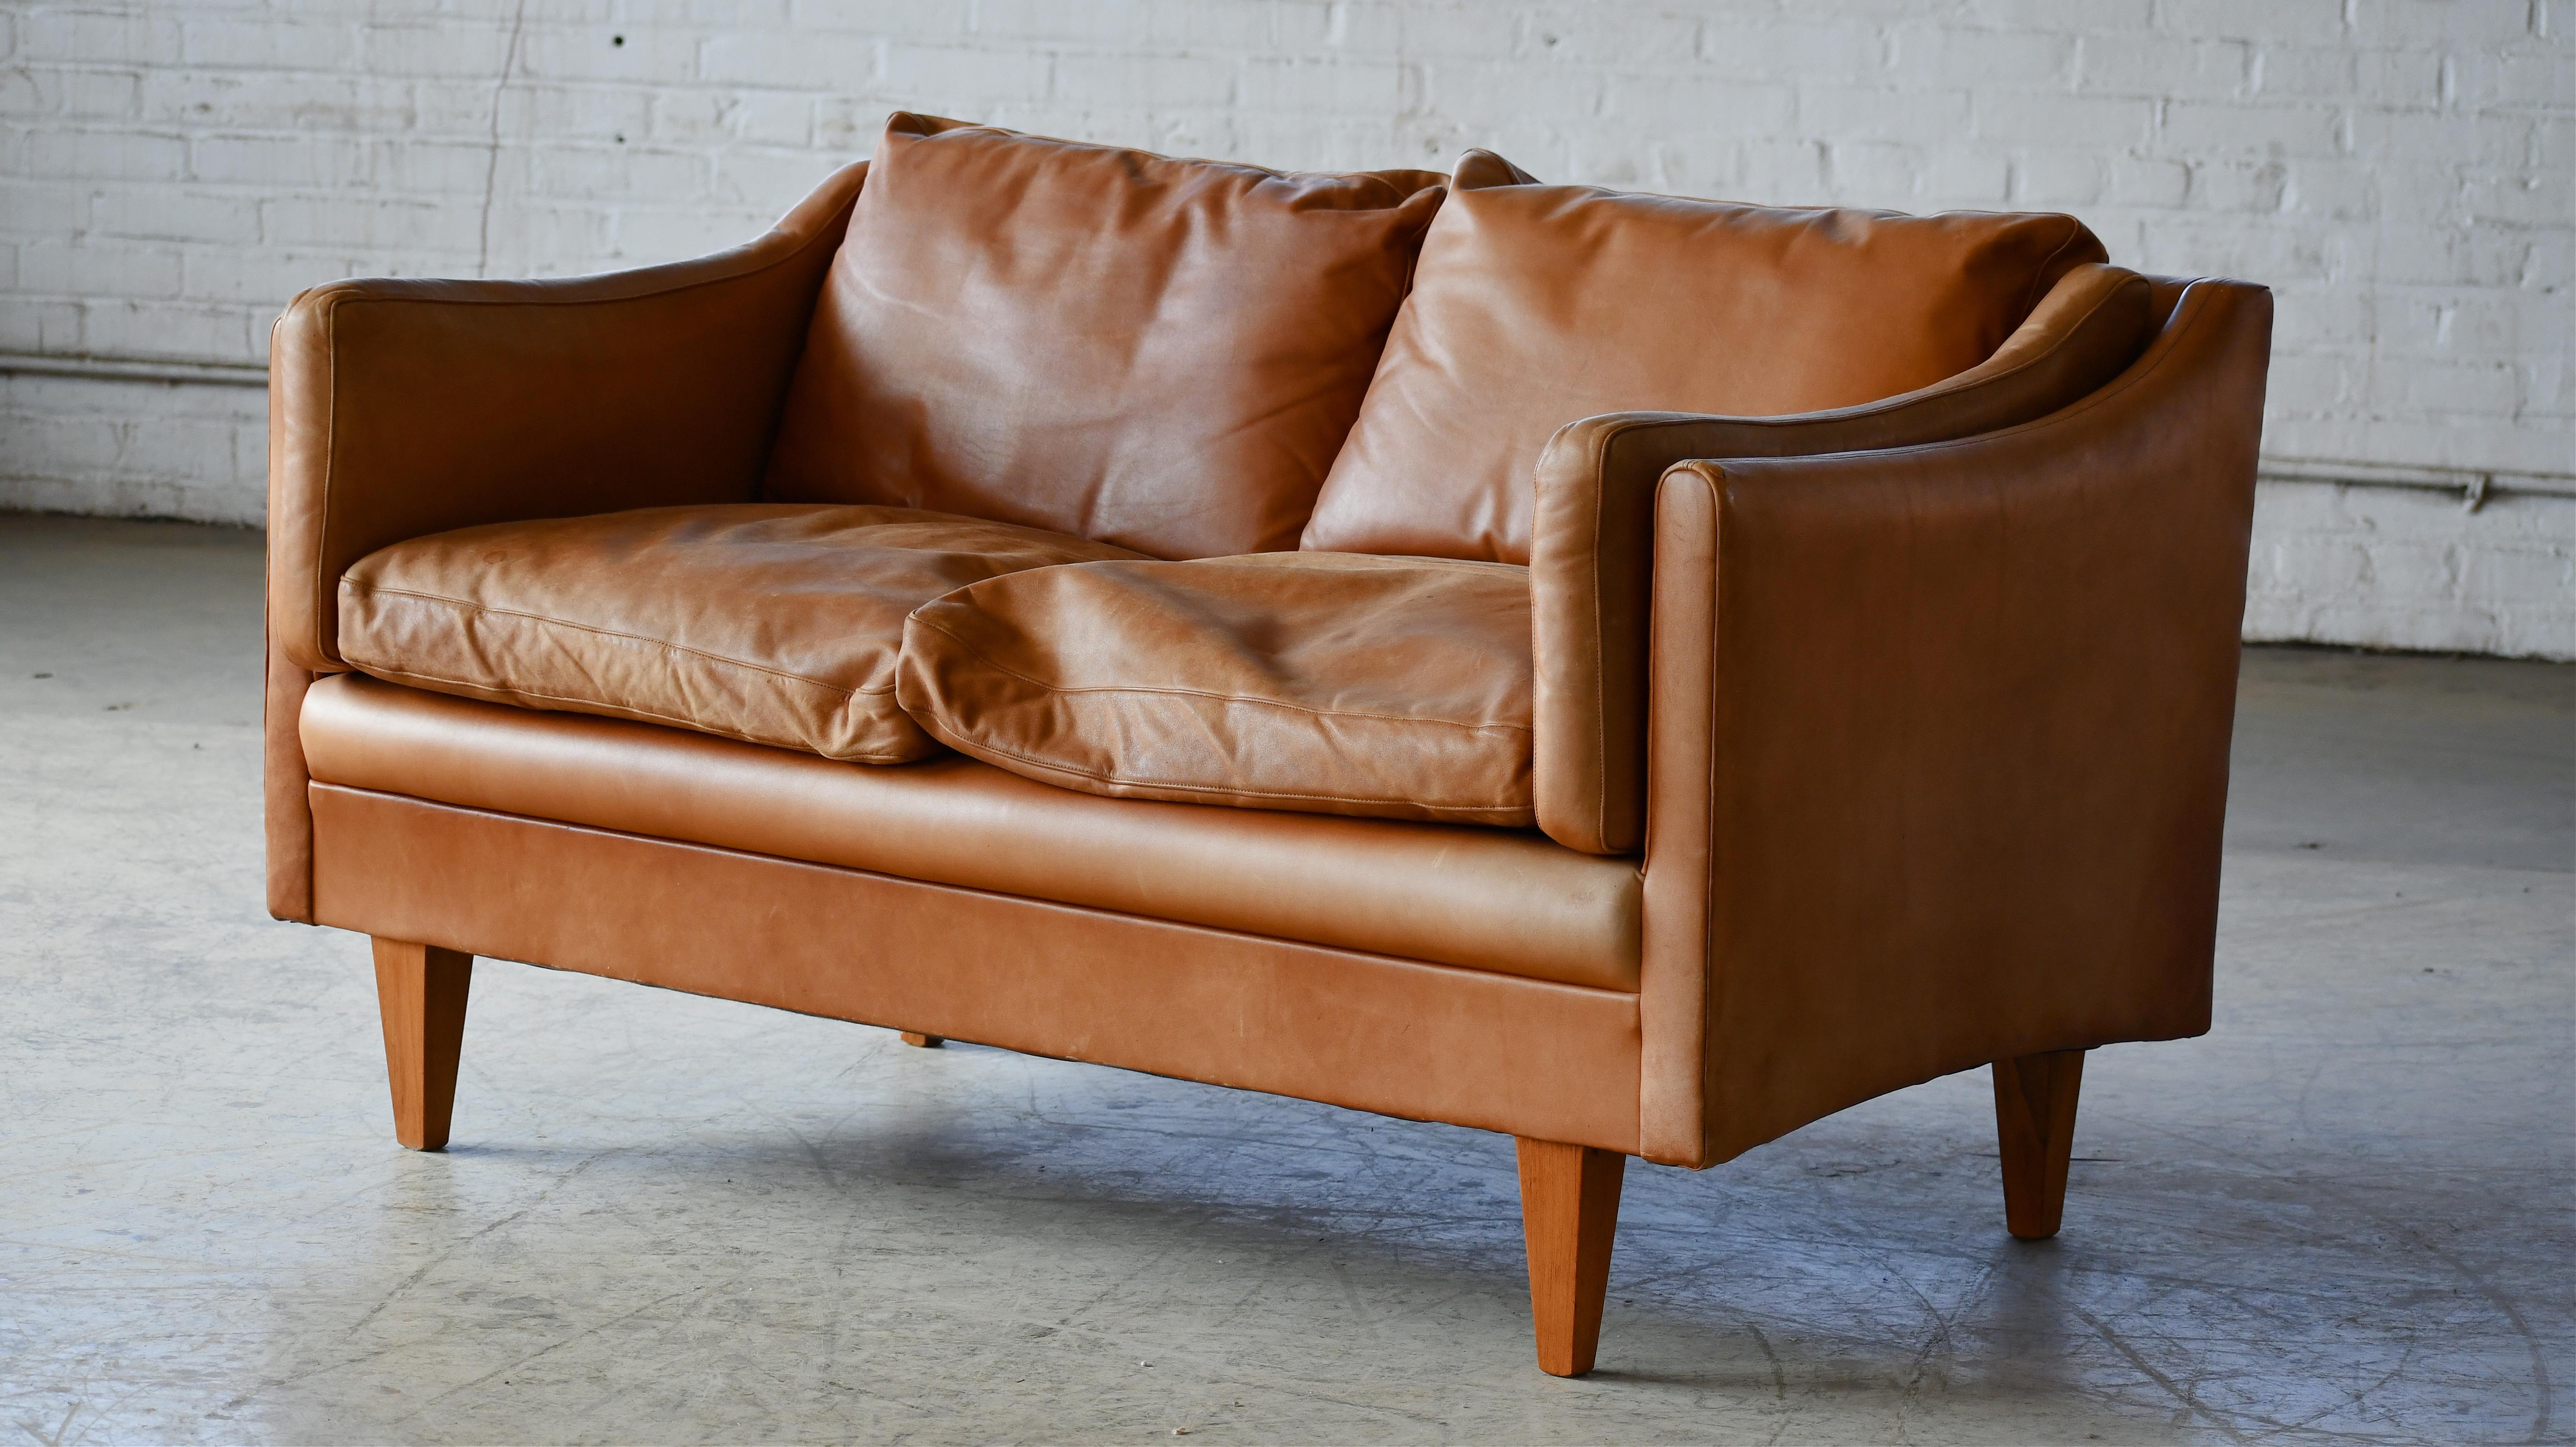 Mid-20th Century Classic Danish 1960s Two-Seat Sofa or Loveseat in Cognac Colored Leather  For Sale